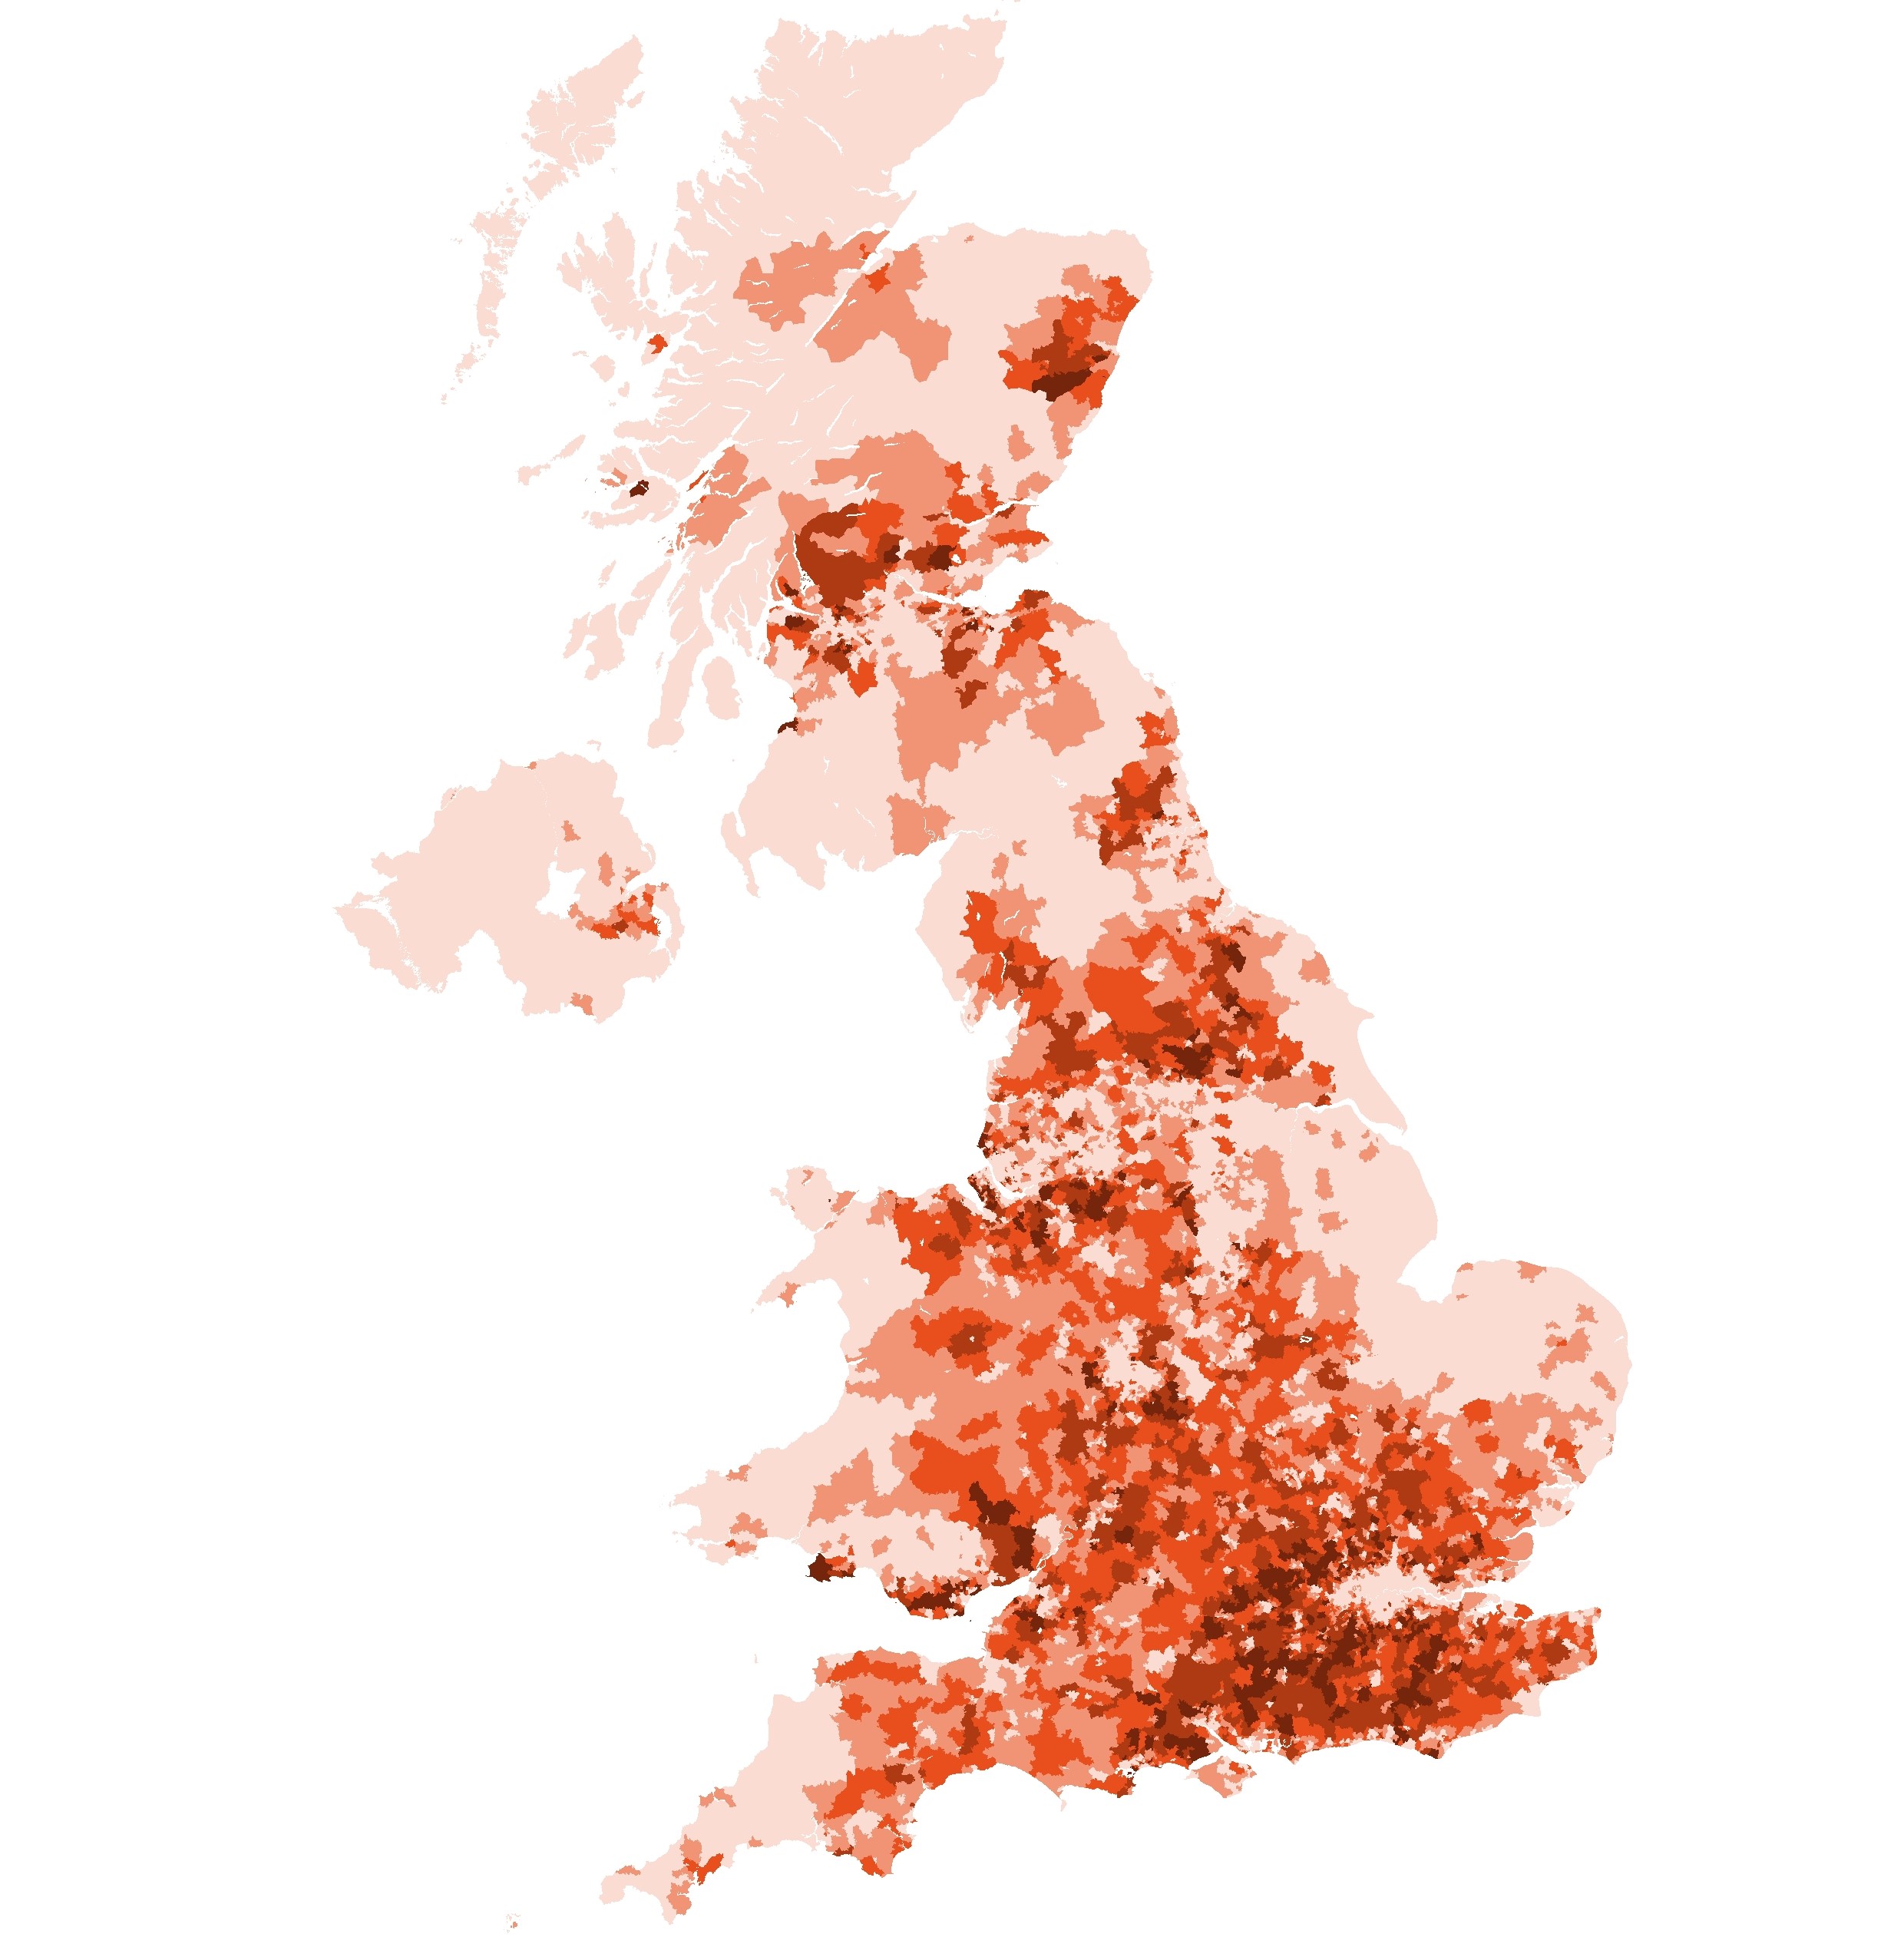 An heatmap of the UK shows dark areas for high distribution of Cummerland Culturebuffs spread across a lot of the country, concentrating around but not in big cities like London and Manchester